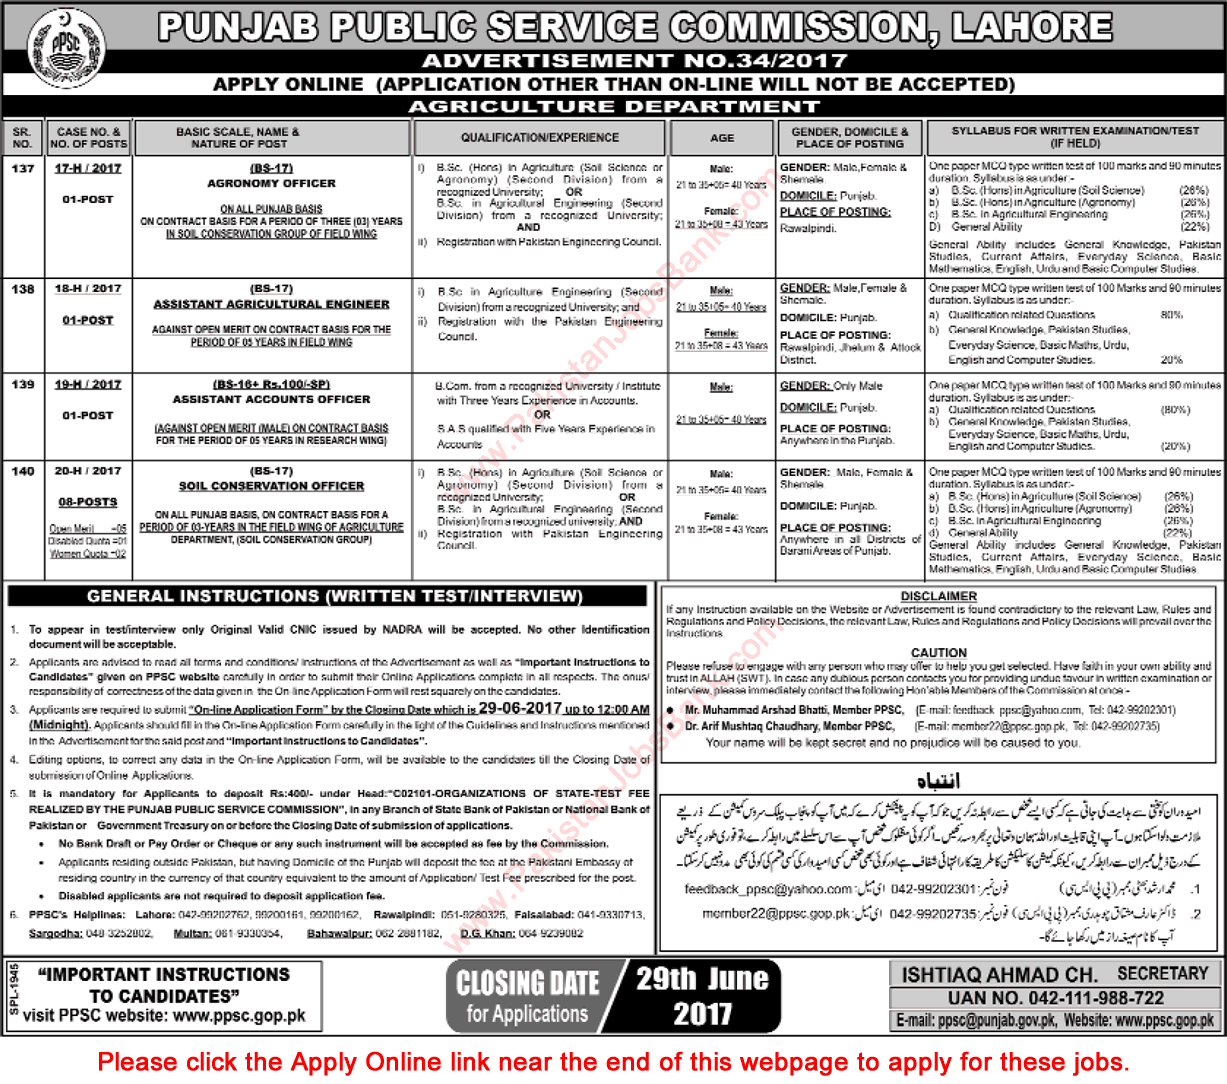 PPSC Jobs June 2017 Apply Online Consolidated Advertisement No 34/2017 Latest